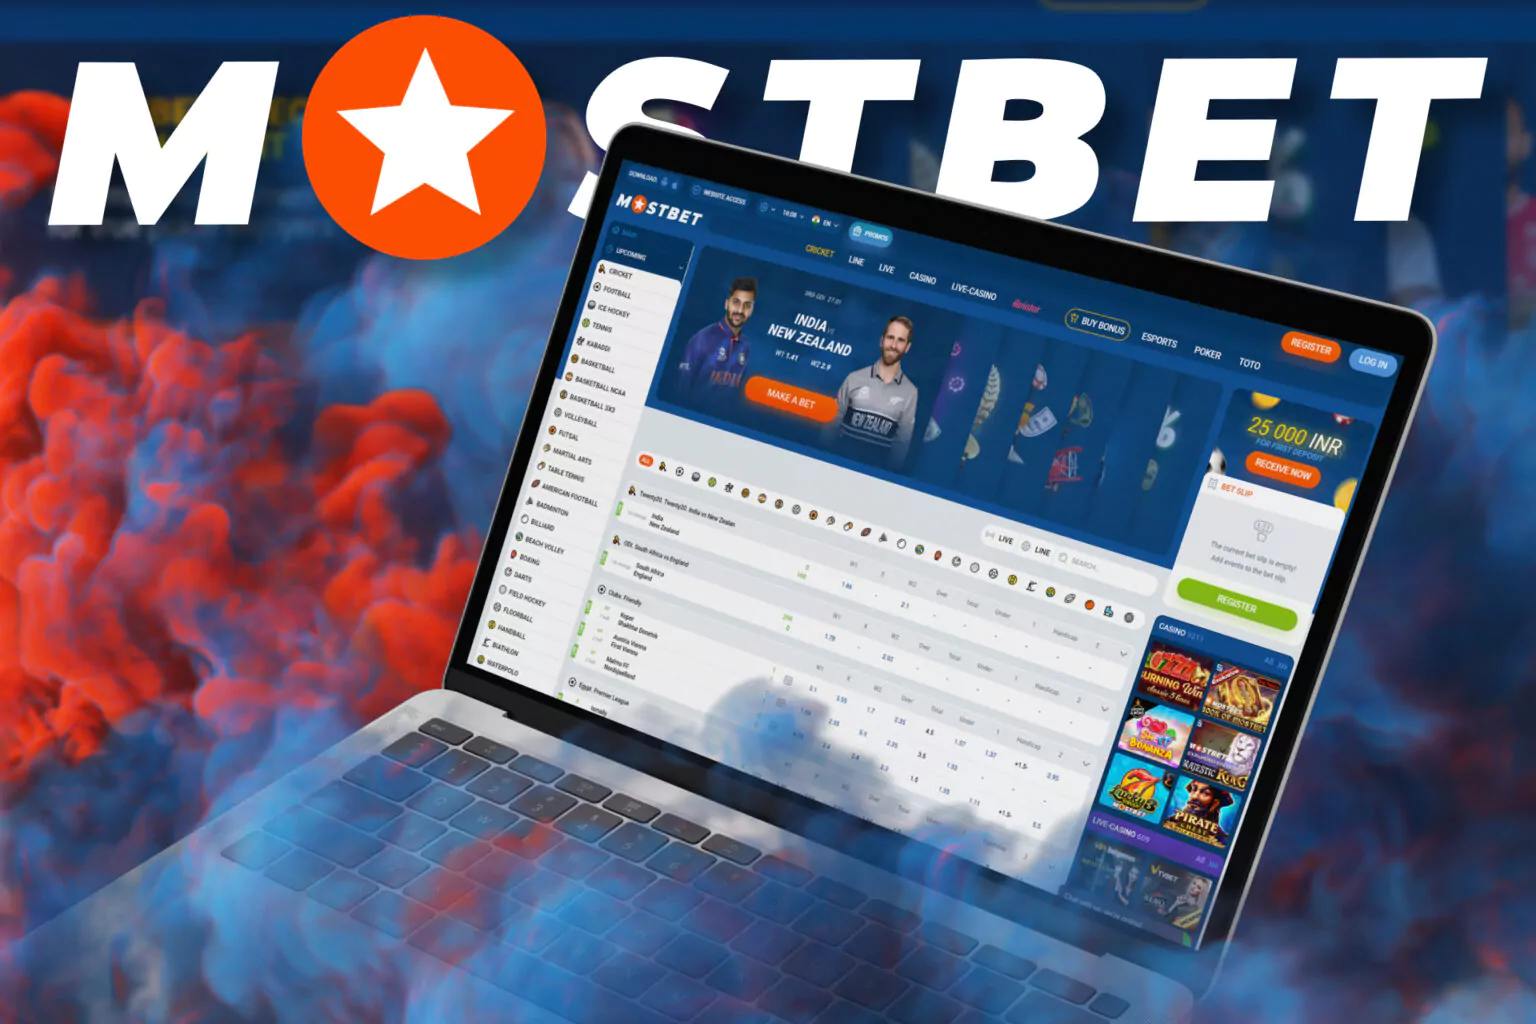 Building Relationships With Mostbet Online Bookmaker and Casino in Turkey